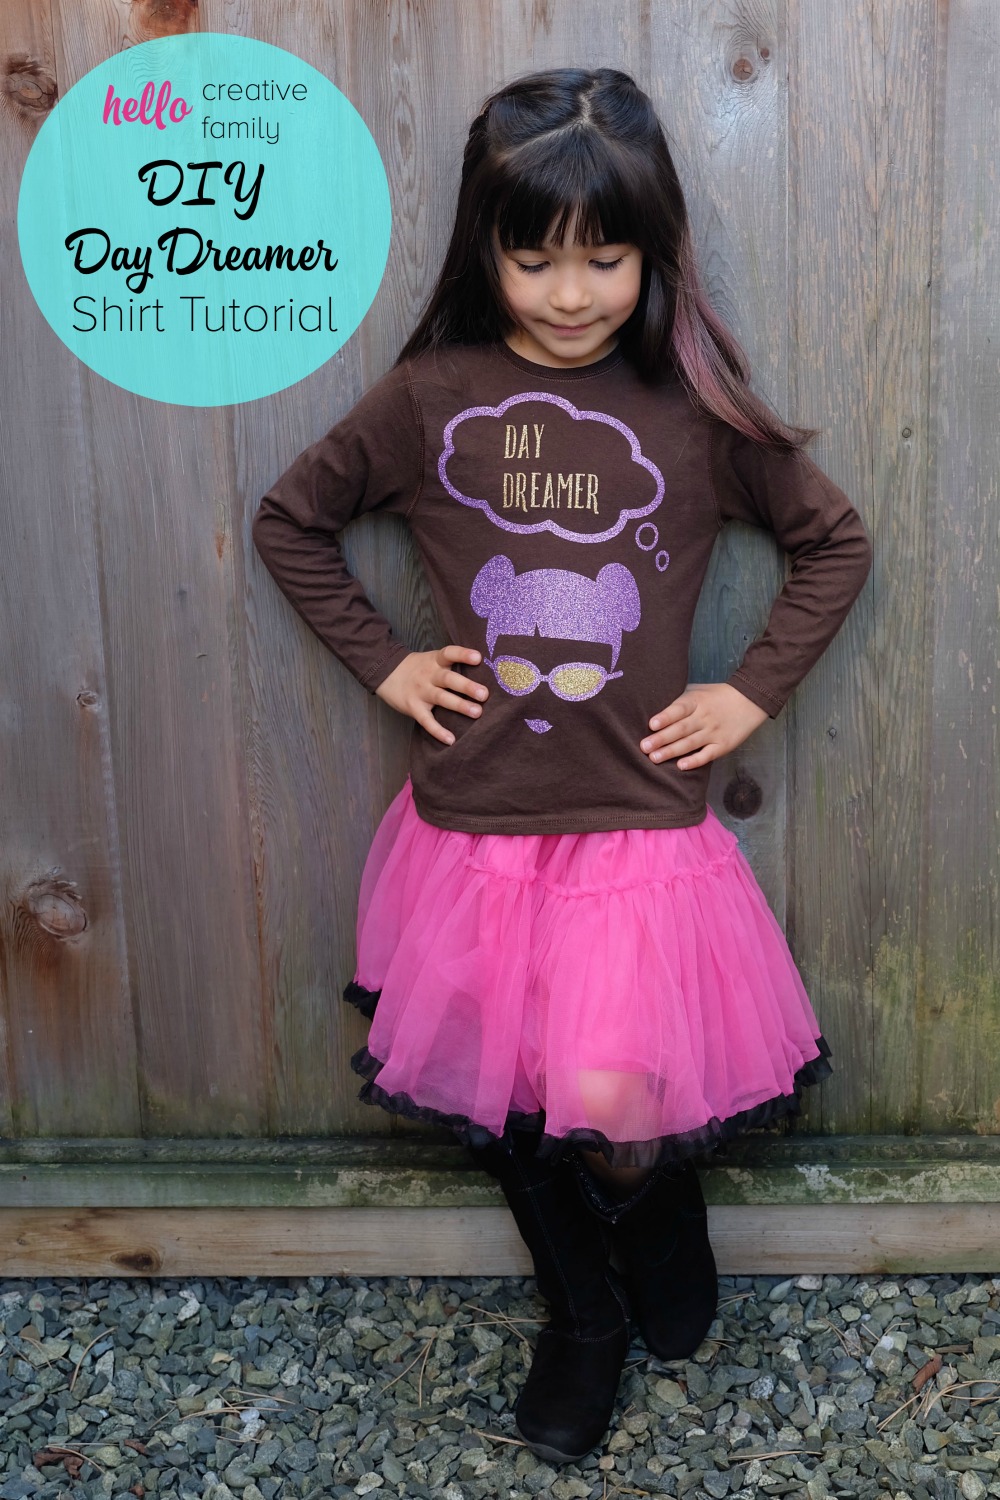 The perfect shirt for the dreamer in your life! This DIY Day Dreamer shirt can be made in minutes using the Cricut Explore. The project has a cute little girl with pigtail buns and says Day Dreamer and would be lovely for girl's clothing!